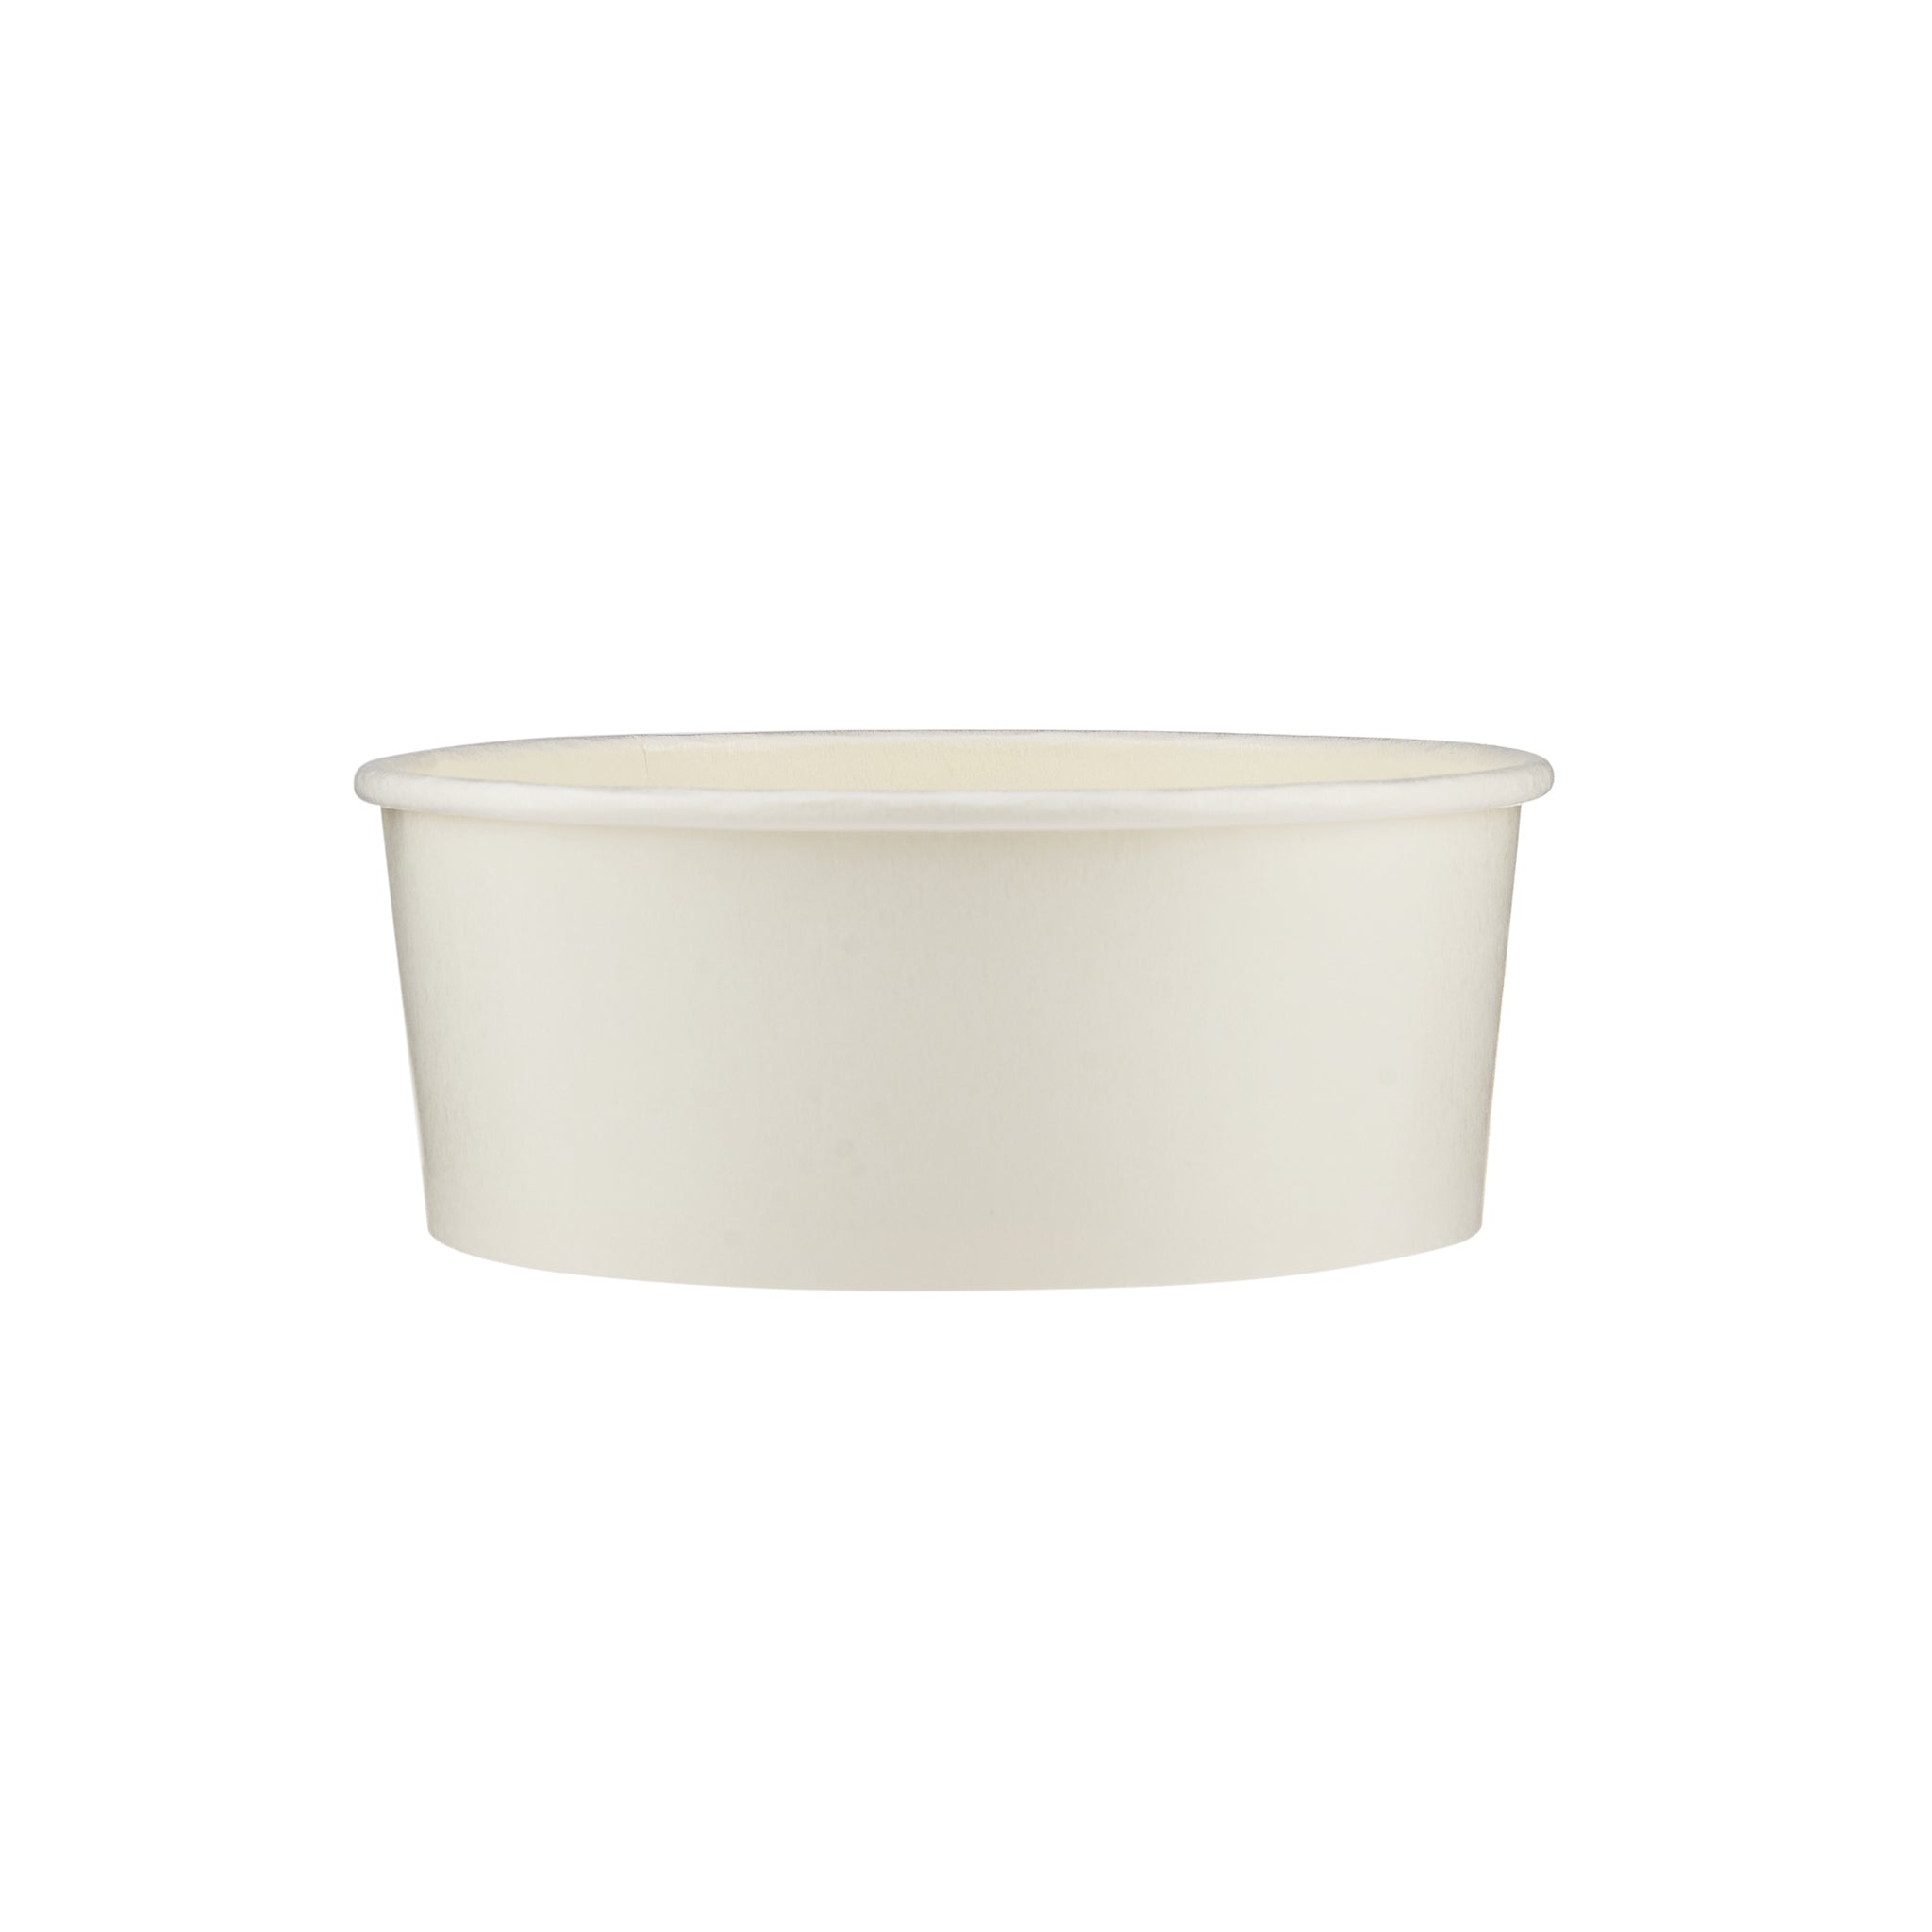 600 Pieces 900 ml White Paper Soup Bowl - Hotpack Global